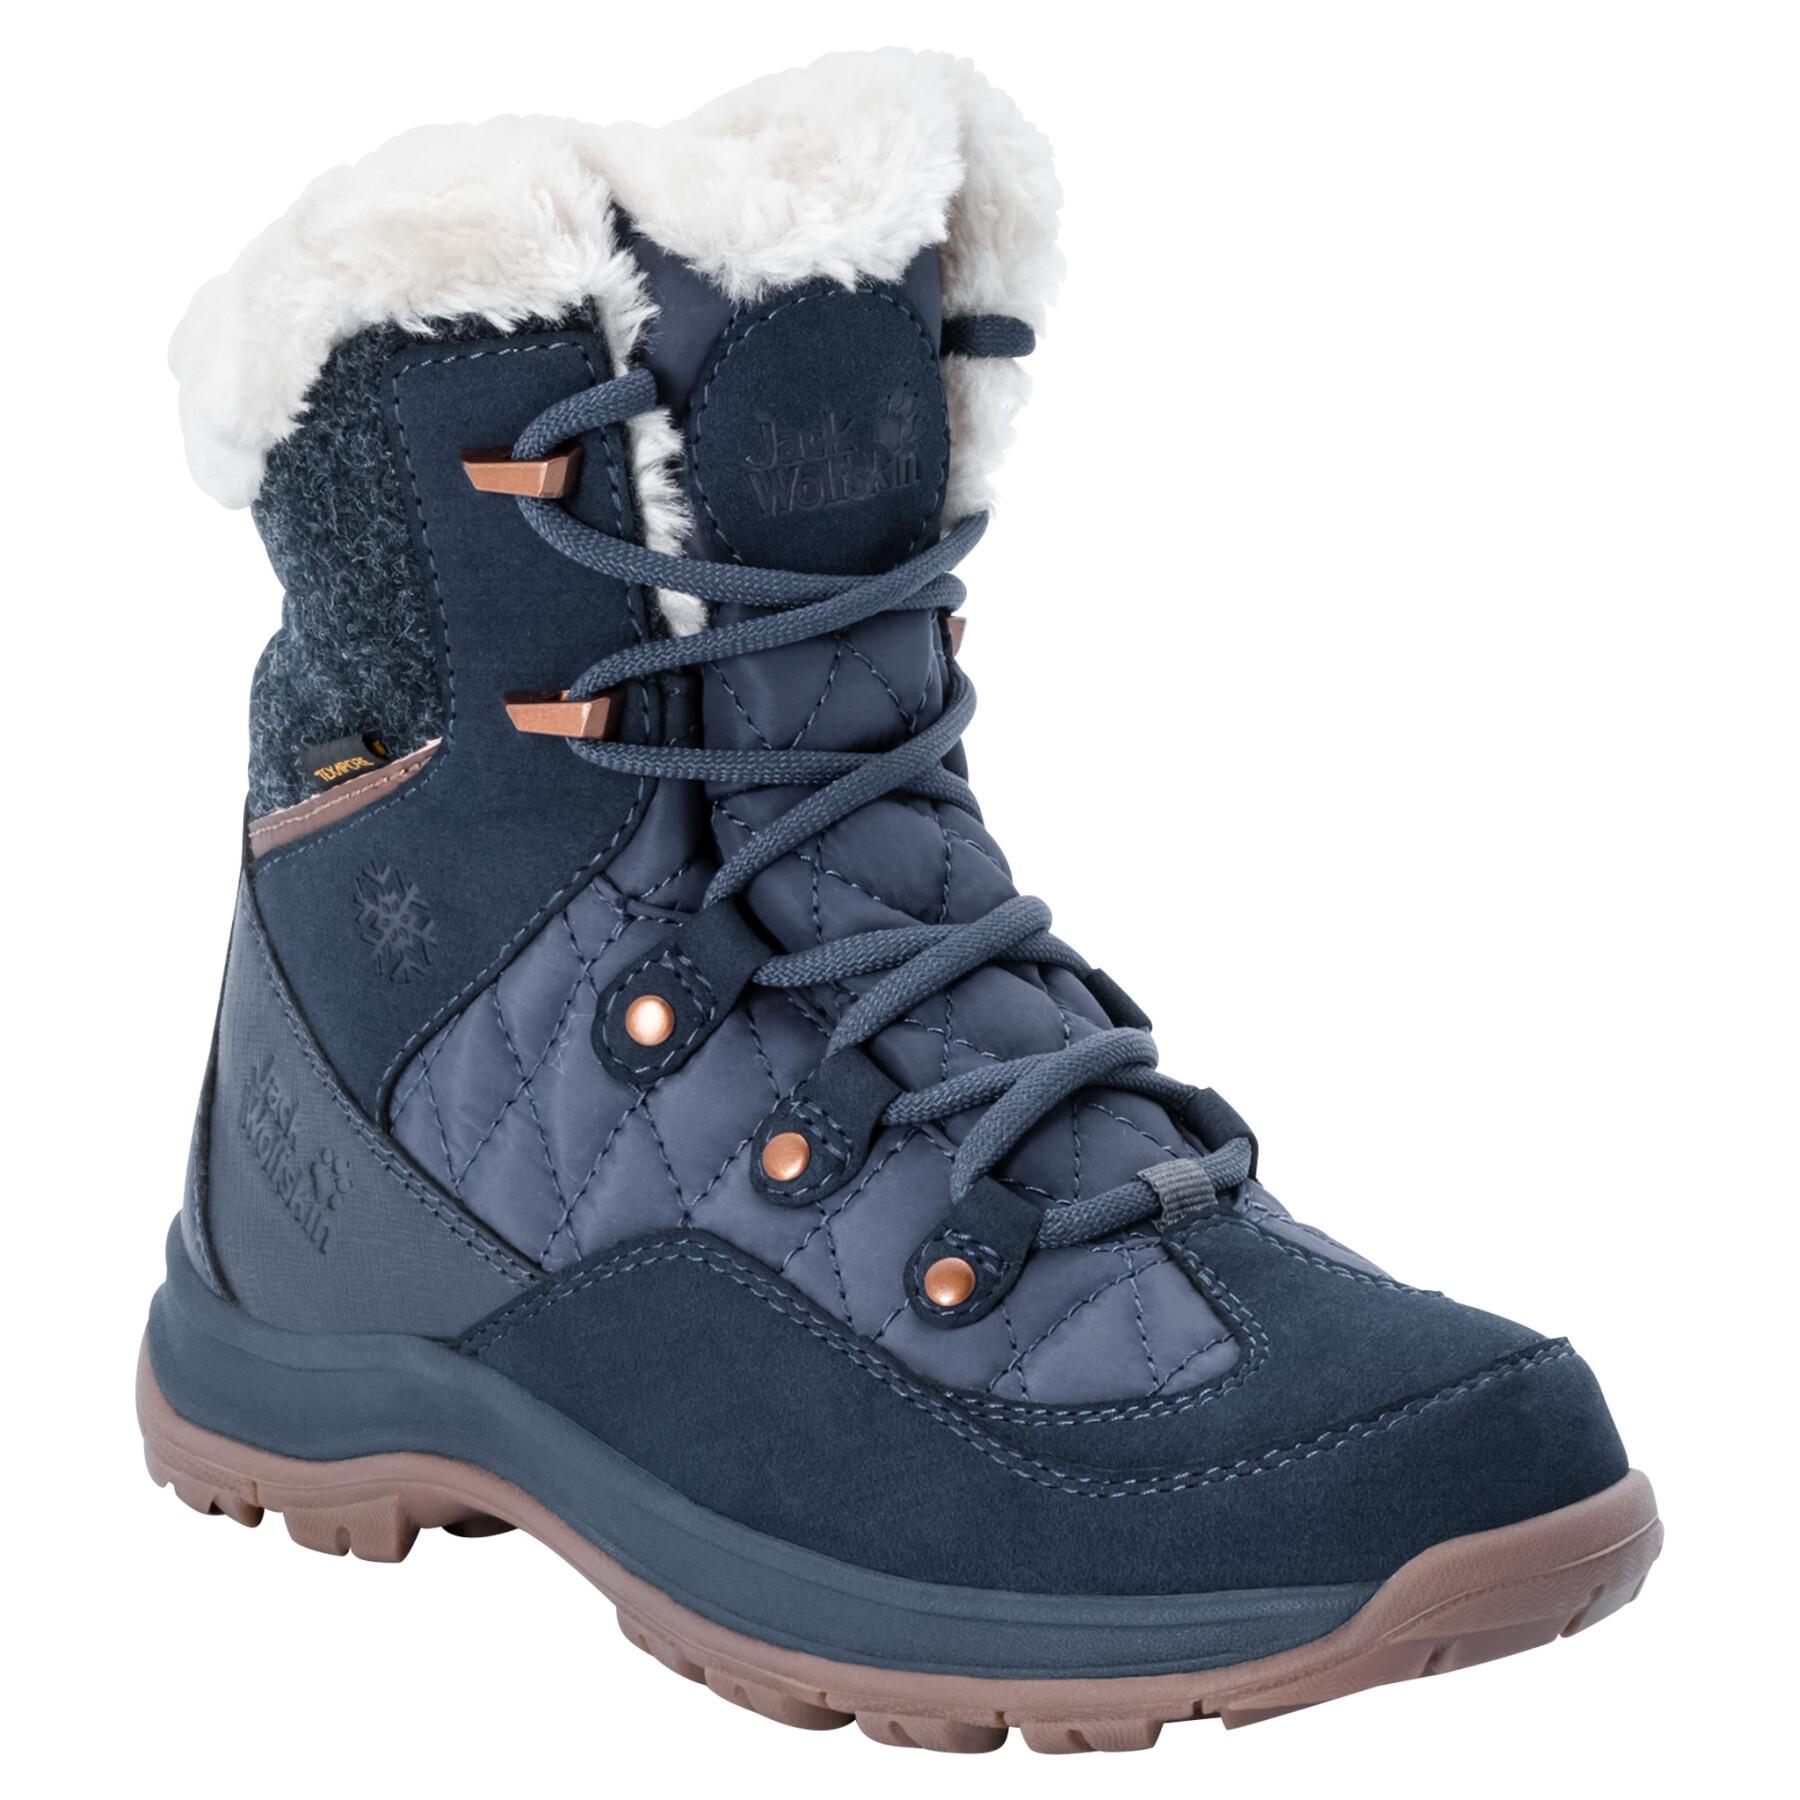 Women's shoes Jack Wolfskin cold bay texapore mid